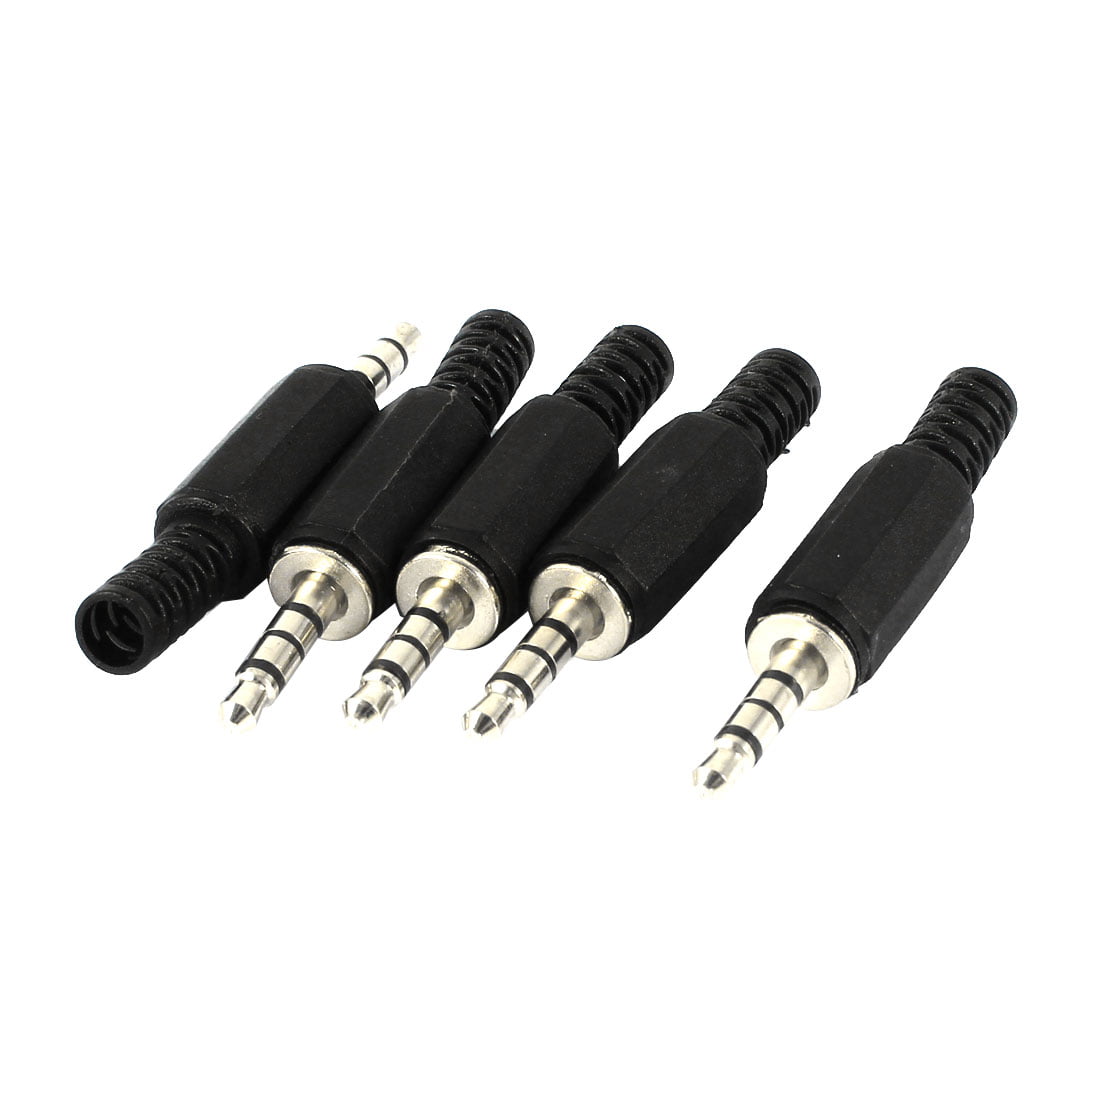 10pcs 3.5mm Stereo Audio Male Plug Jack Adapter Audio Connector Booted Headphone